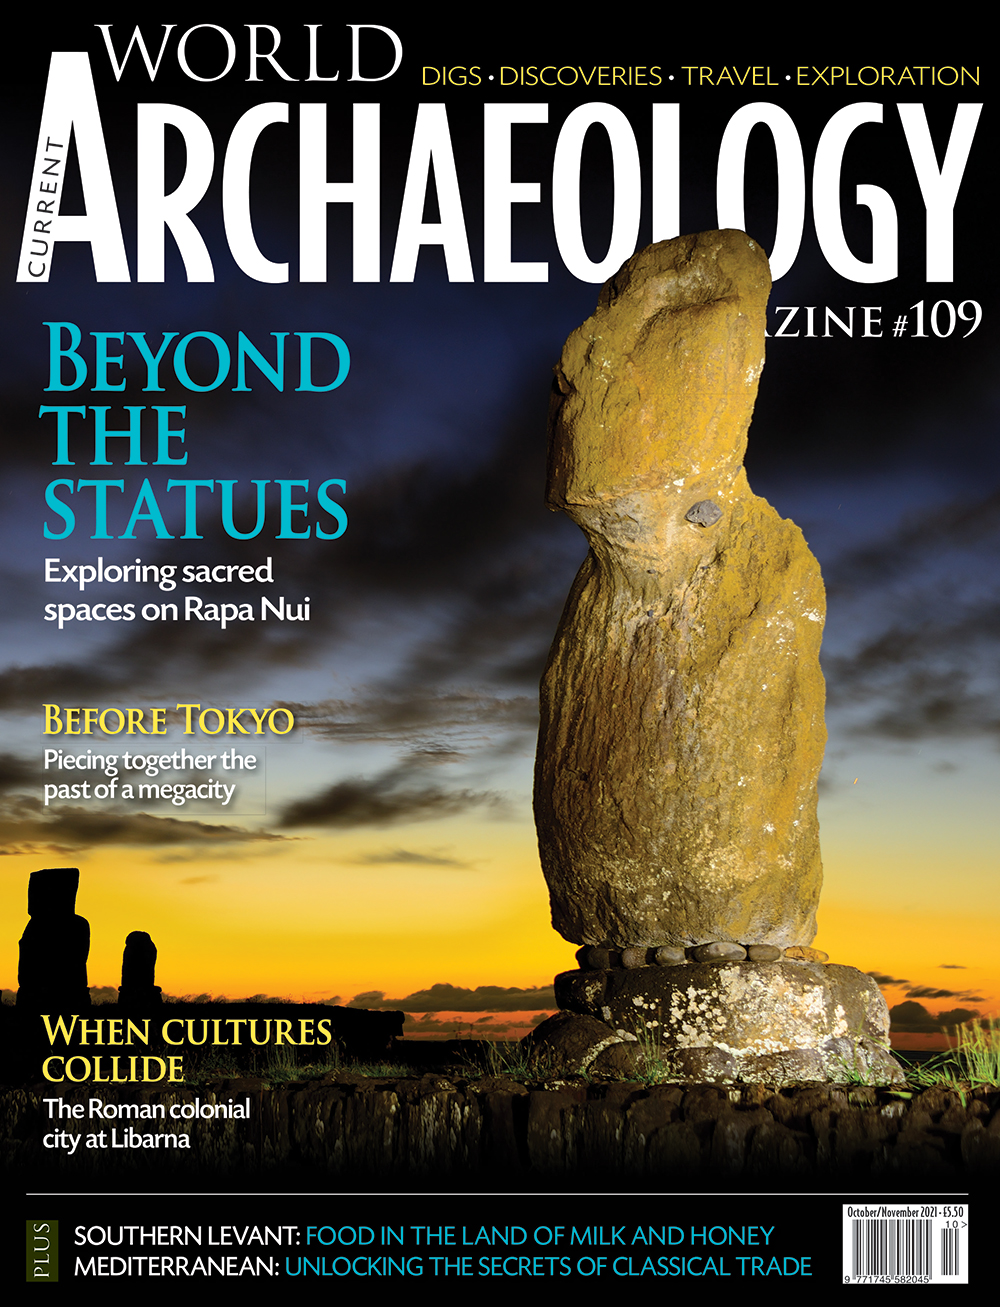 Current World Archaeology issue 109